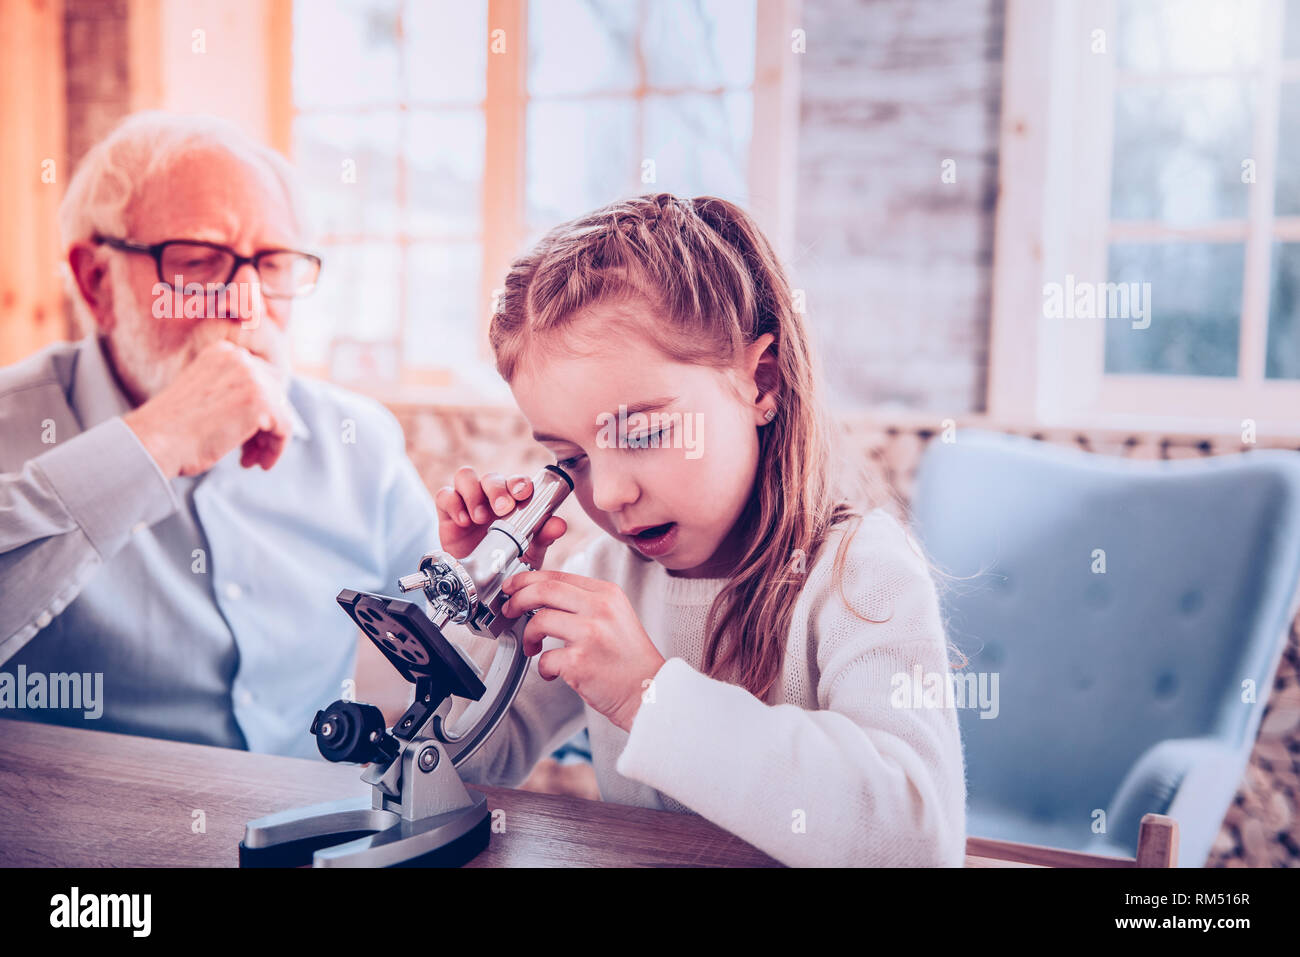 Smart schooler with nice hairstyle using microscope Stock Photo